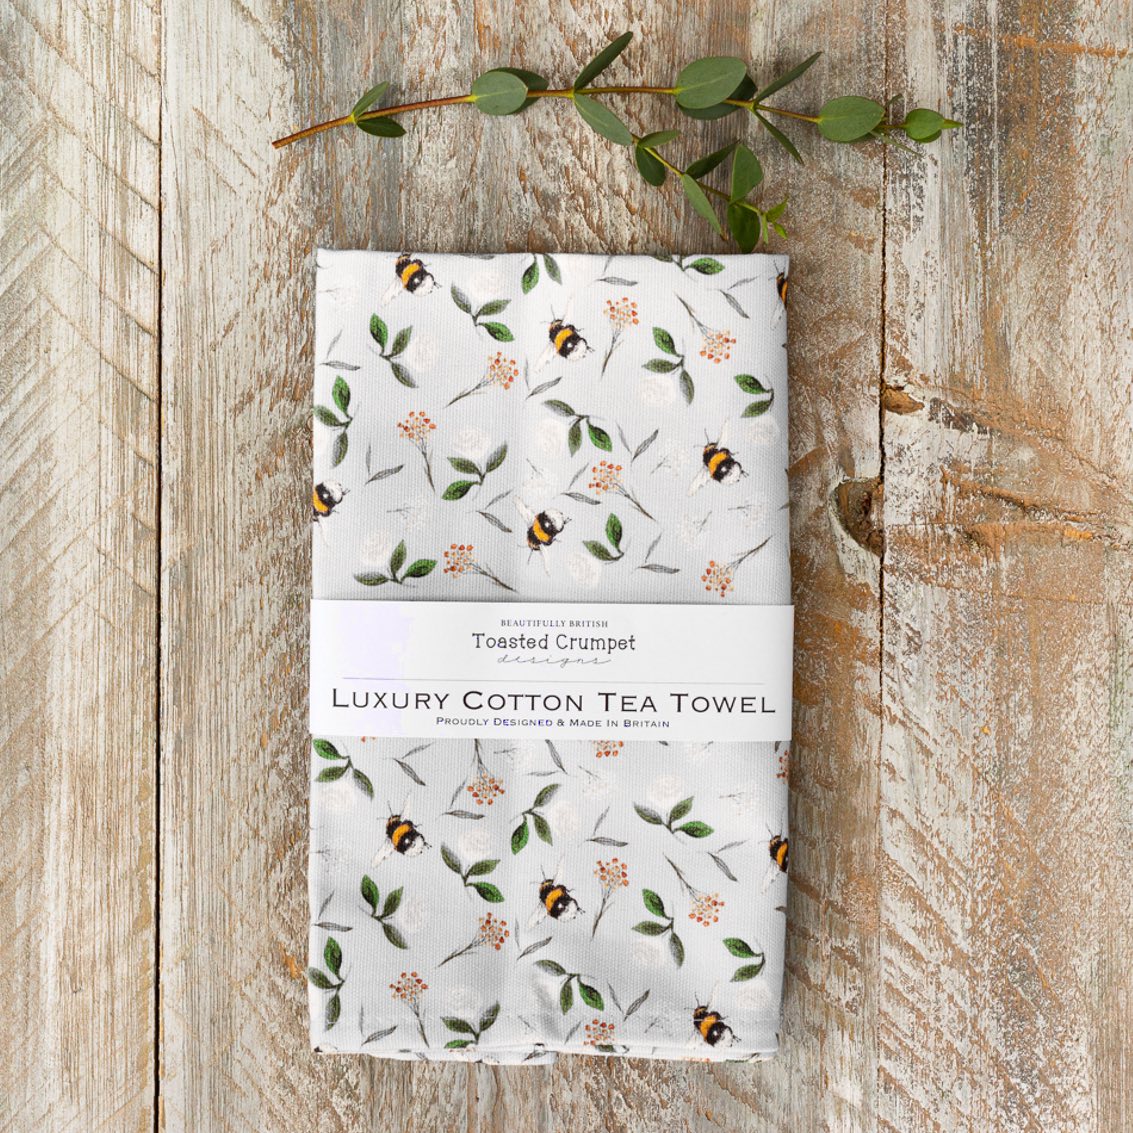 Tea towel with bee and floral pattern folded into a rectangular shape with a white belly band with Toasted Crumpet branding. Photographed on a wooden surface.